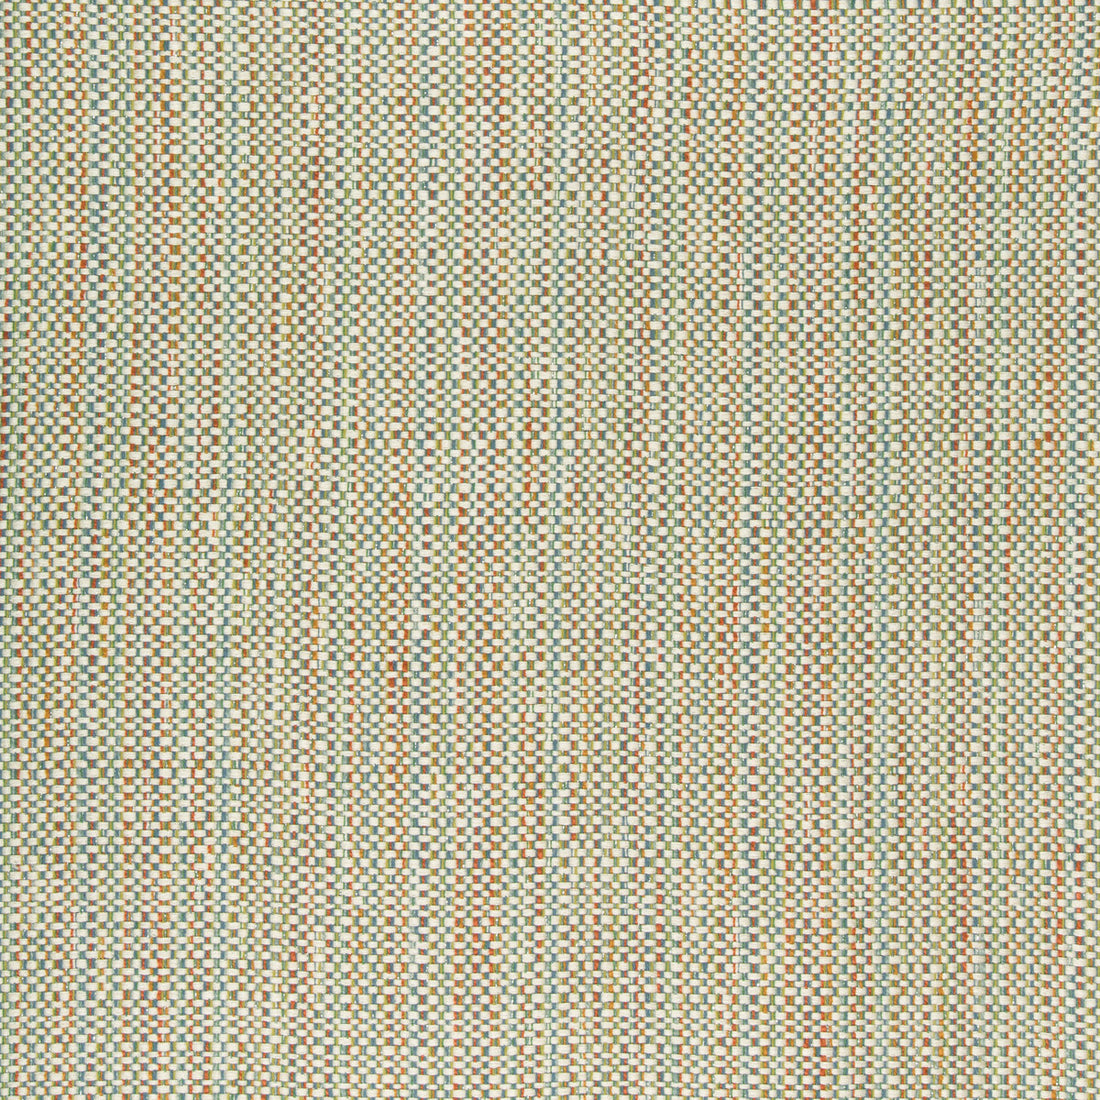 Kravet Design fabric in 34683-312 color - pattern 34683.312.0 - by Kravet Design in the Performance Crypton Home collection